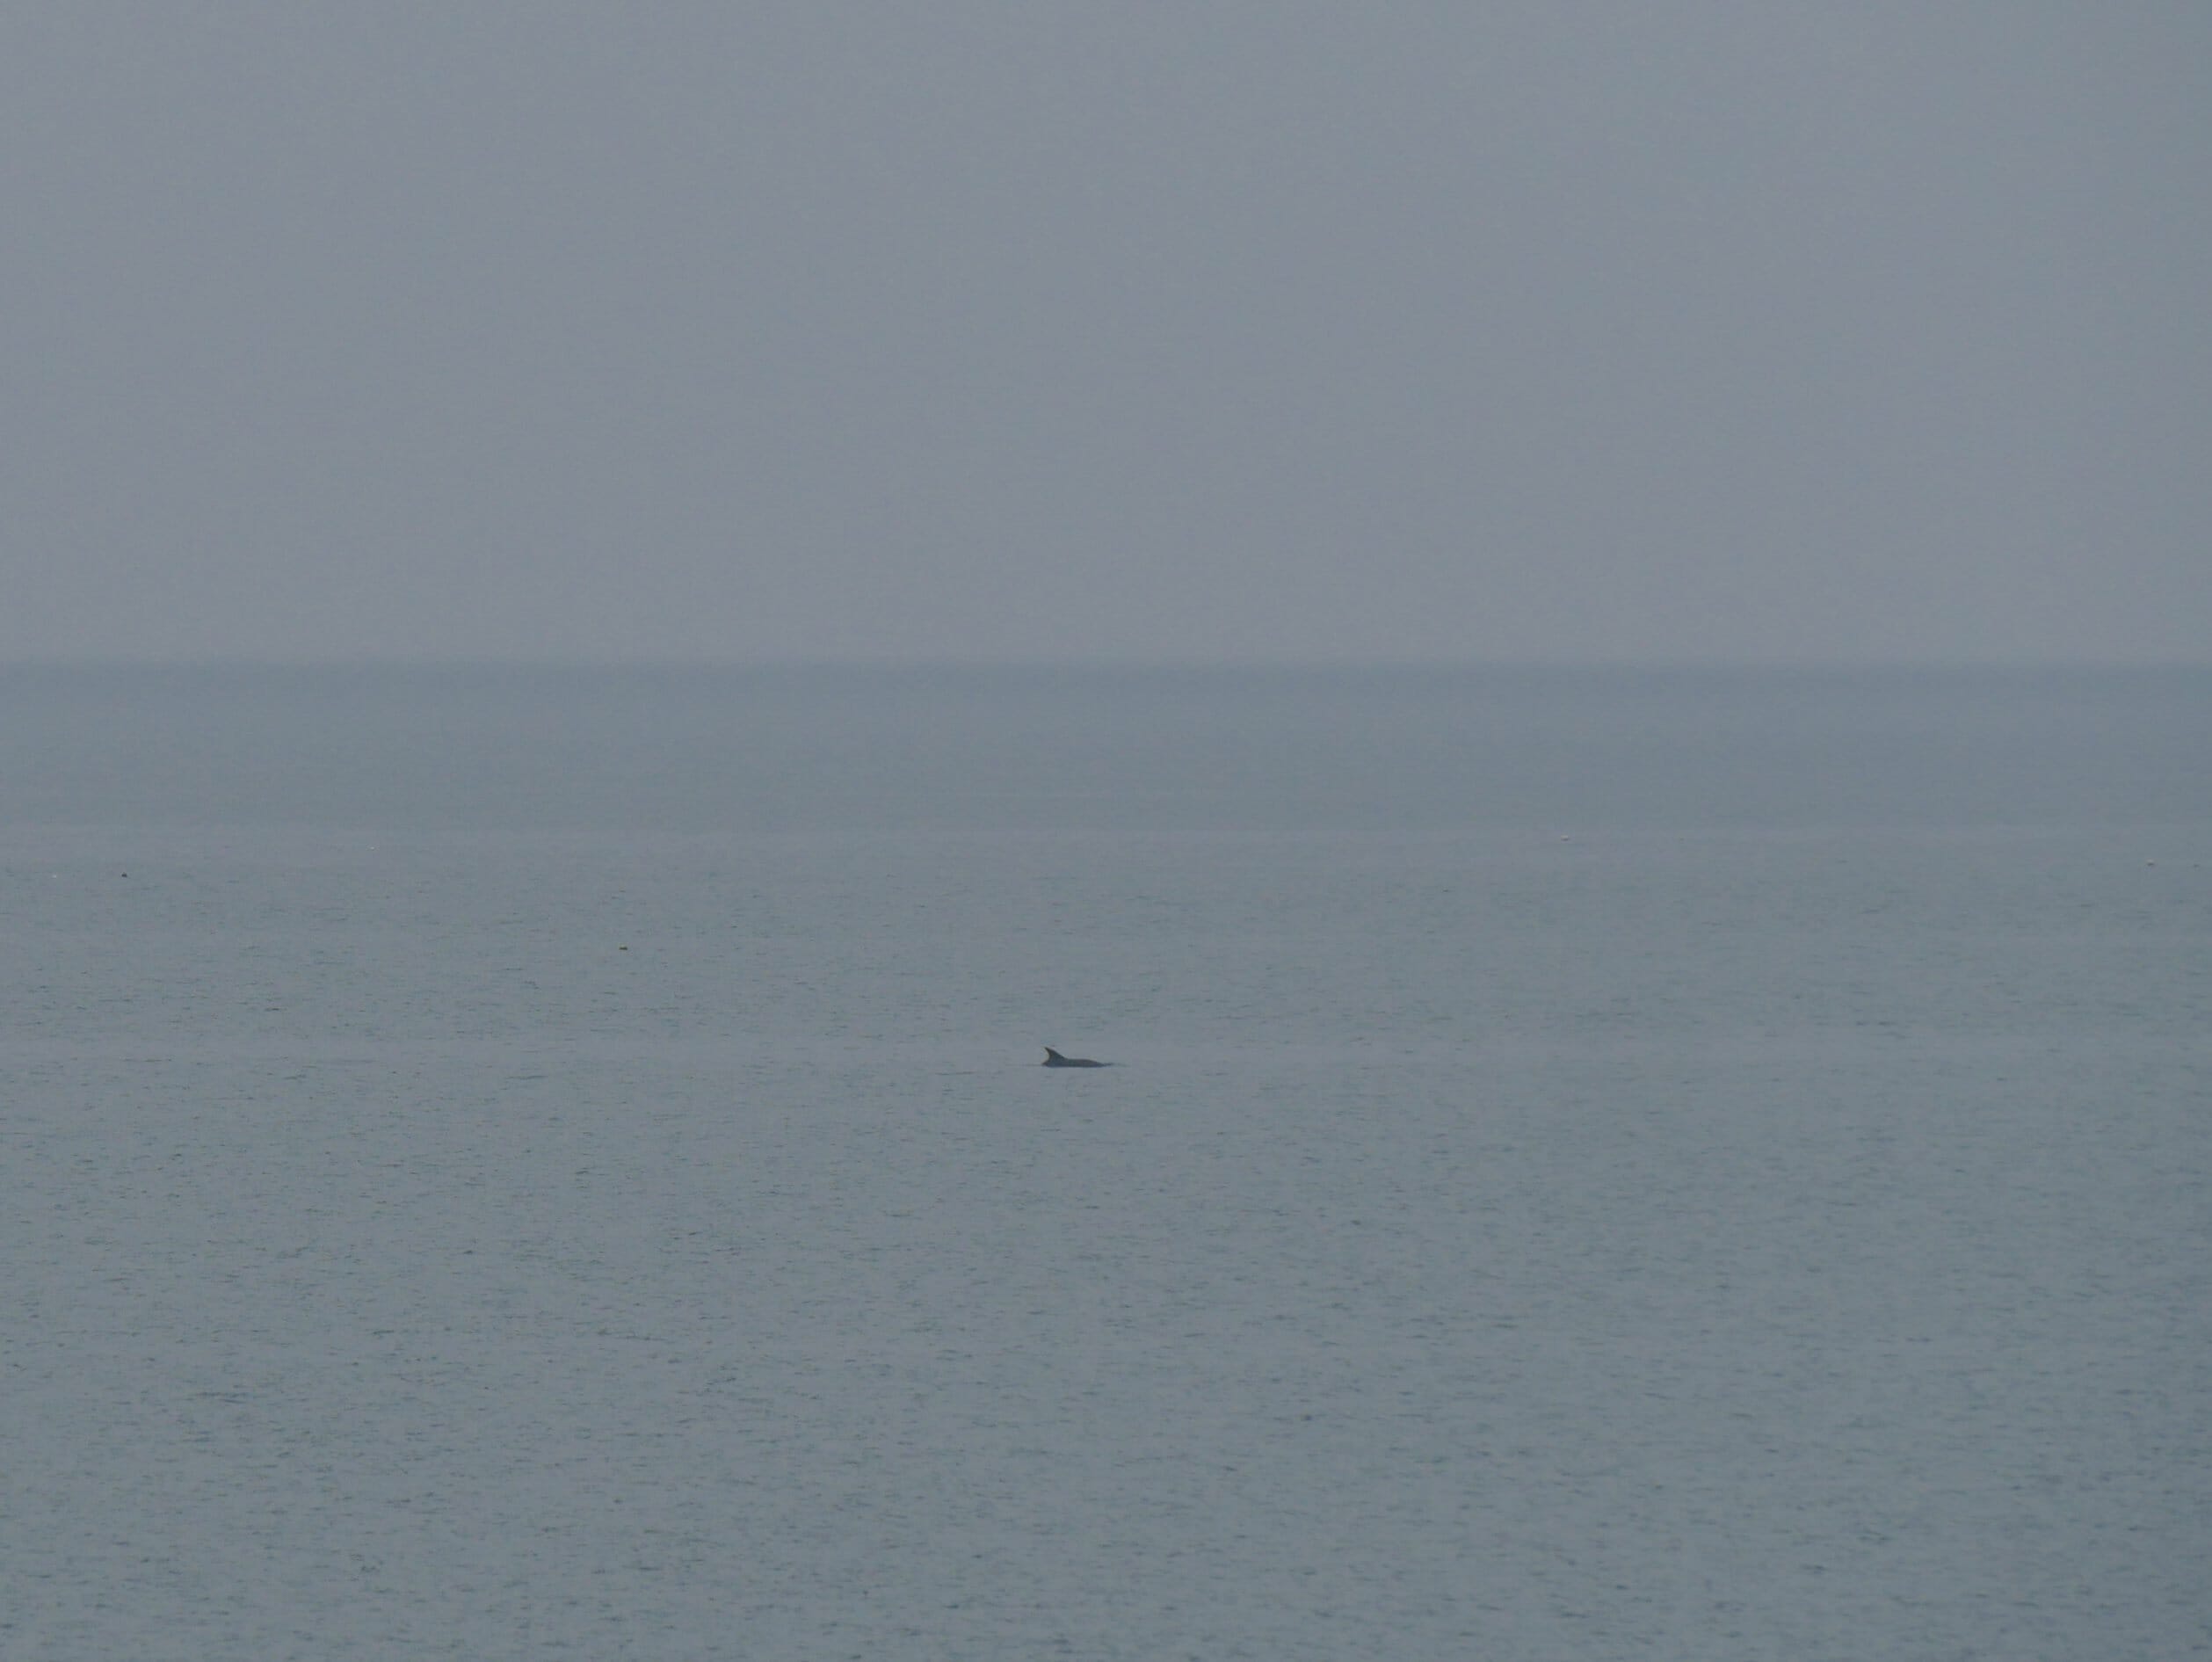 A dolphin in New Quay, Wales